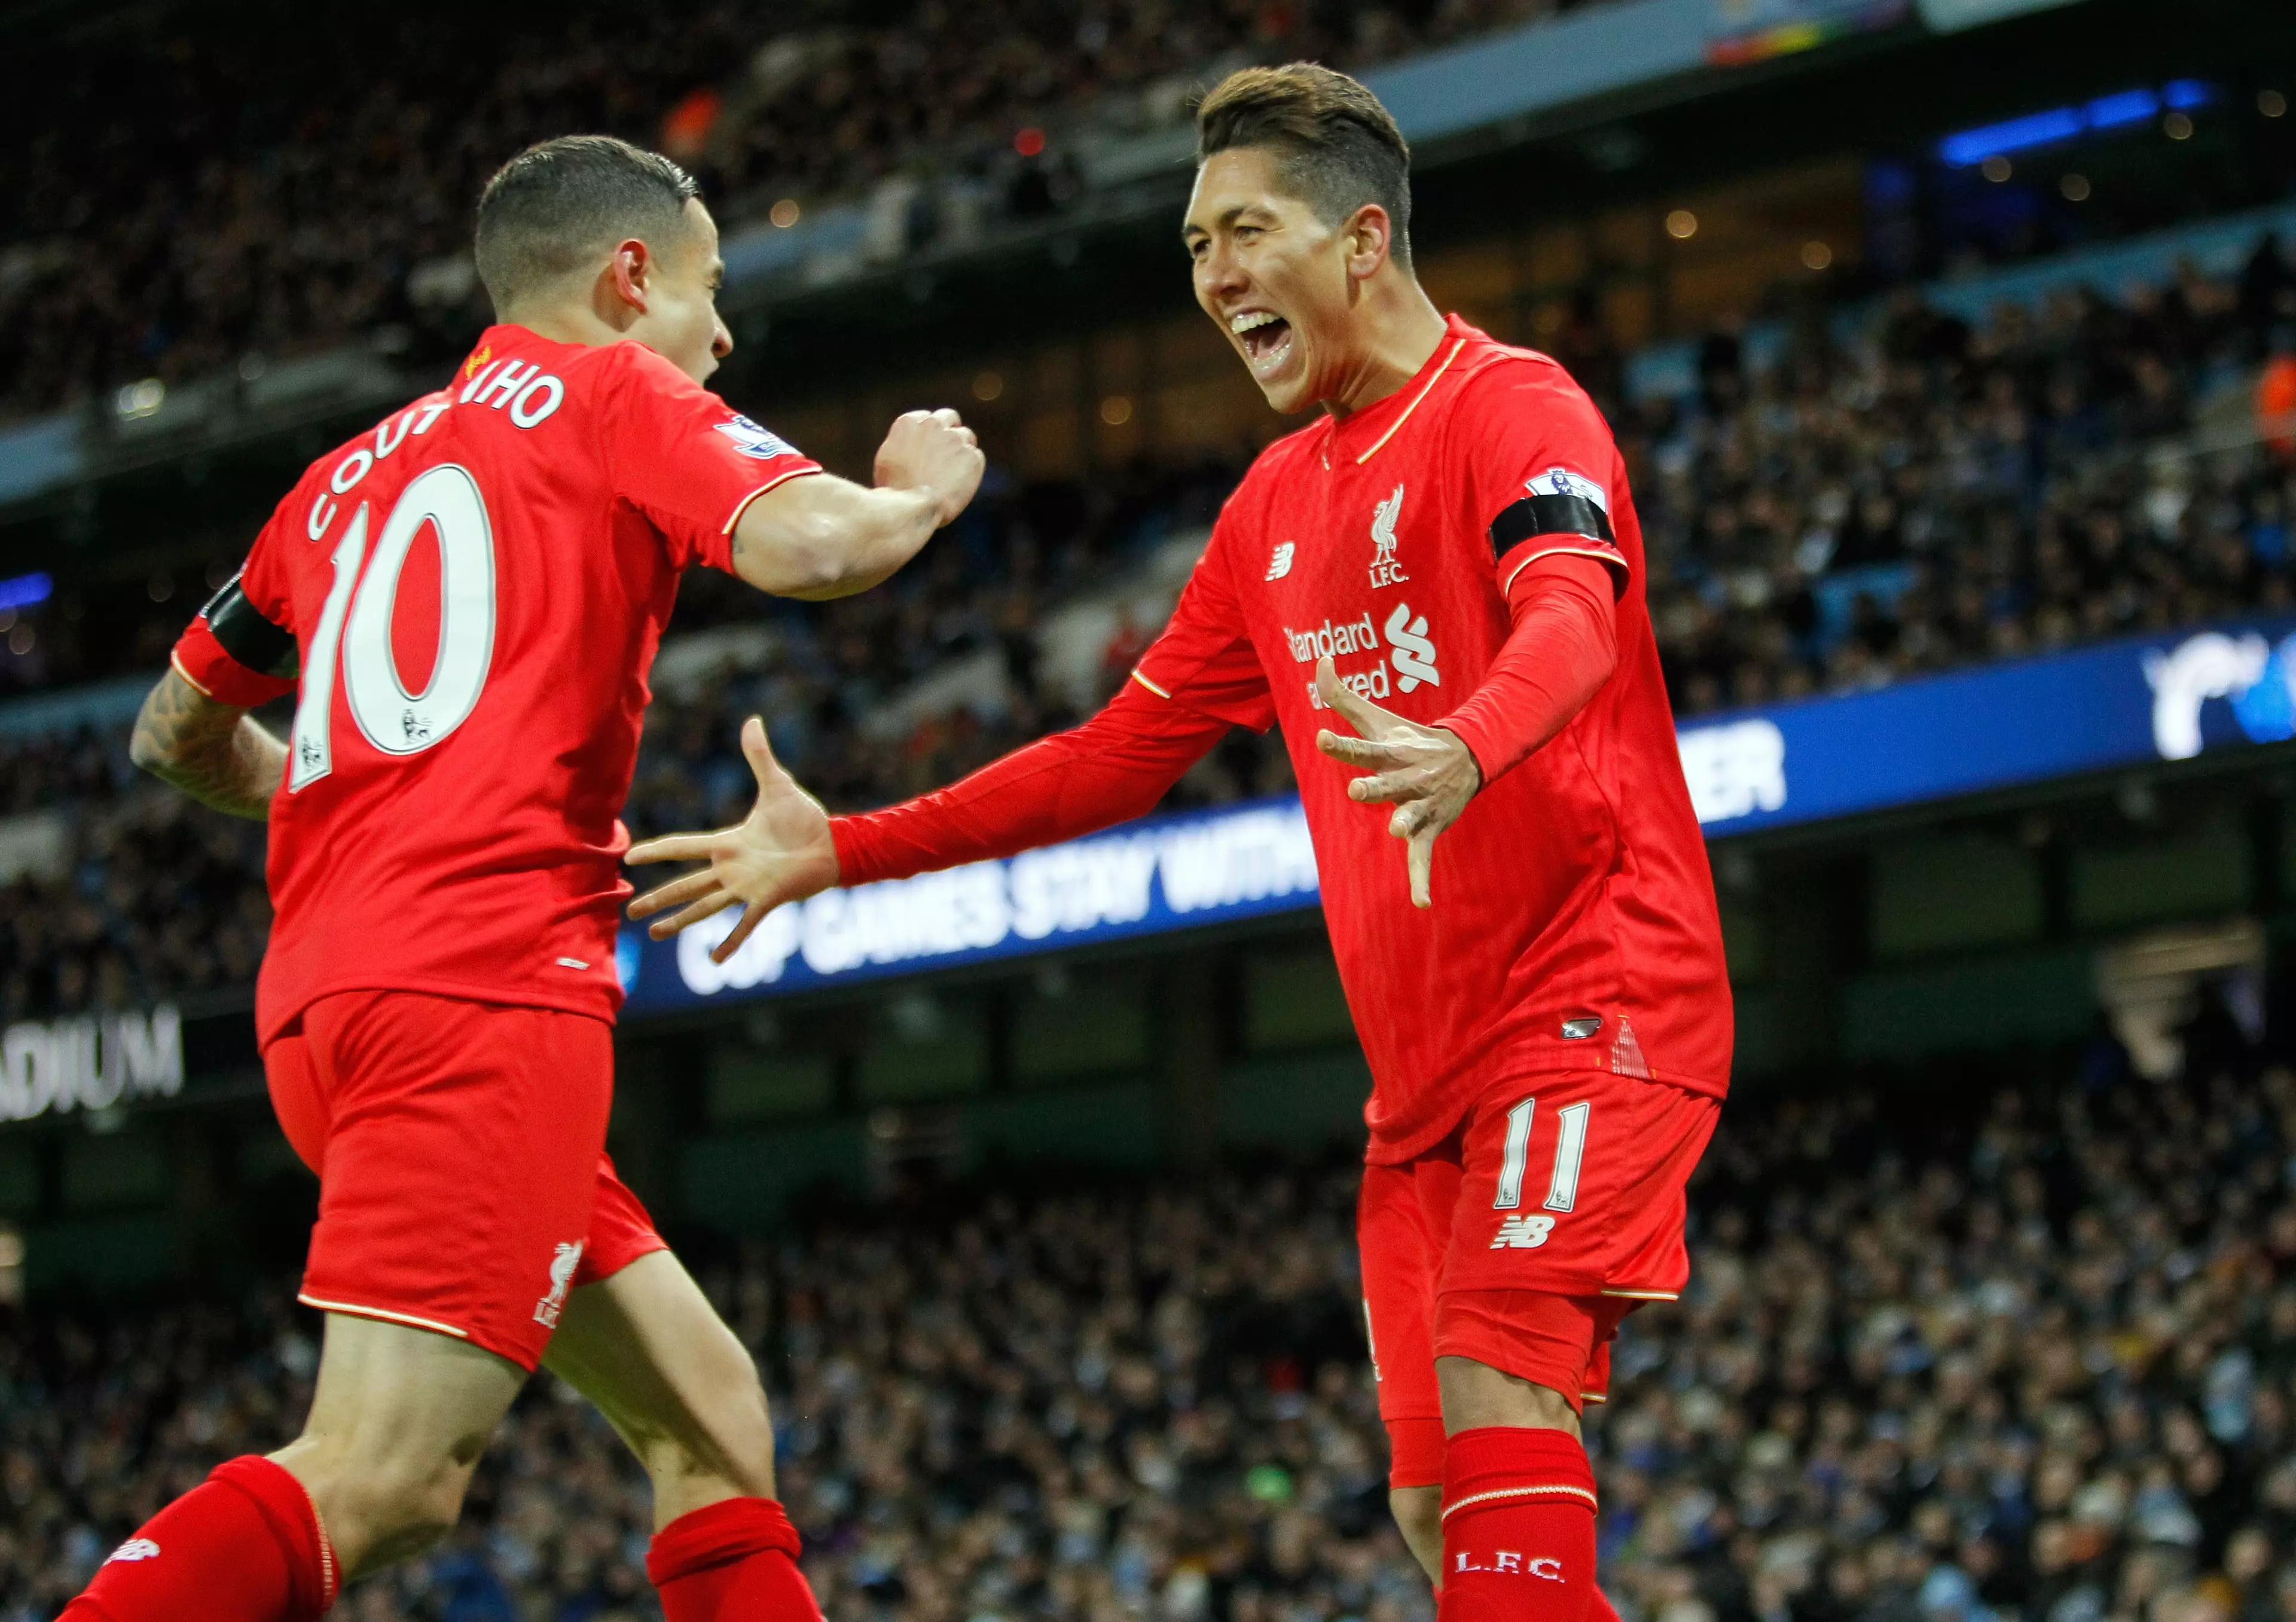 Liverpool cut apart Manchester City at the Etihad in November 2015